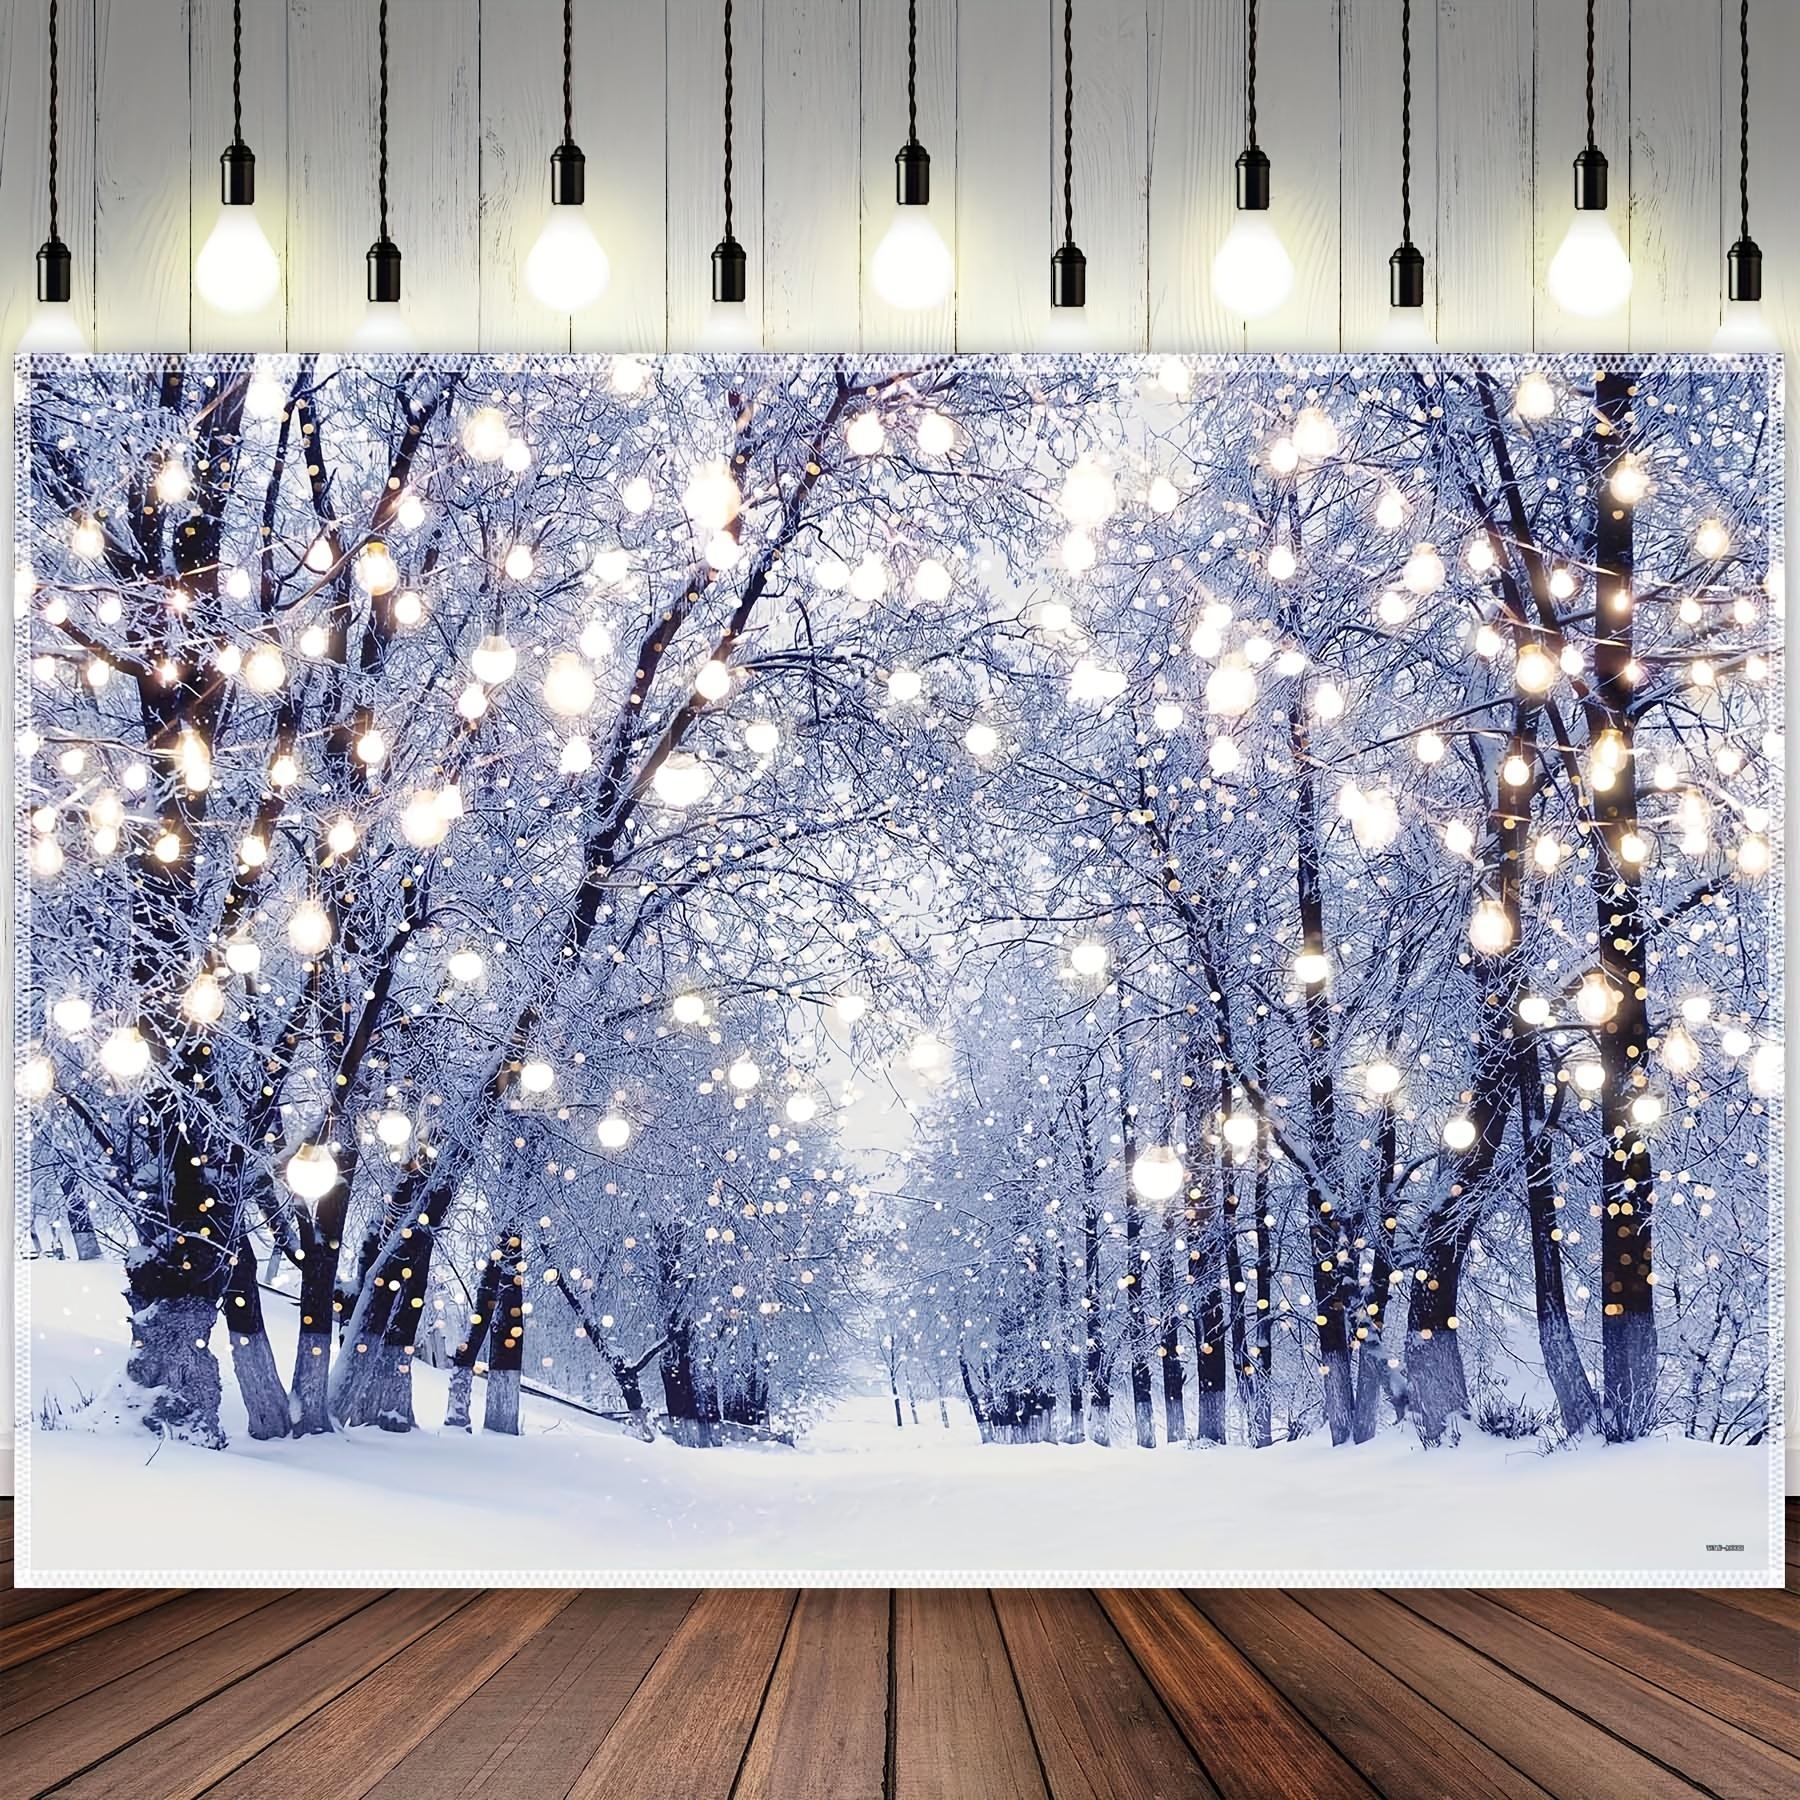 MG Decorative Home Winter Forest Polyester Photography Backdrop Snow Natural Scenery Landscape Path Background Wonderland Baby Shower Decorations